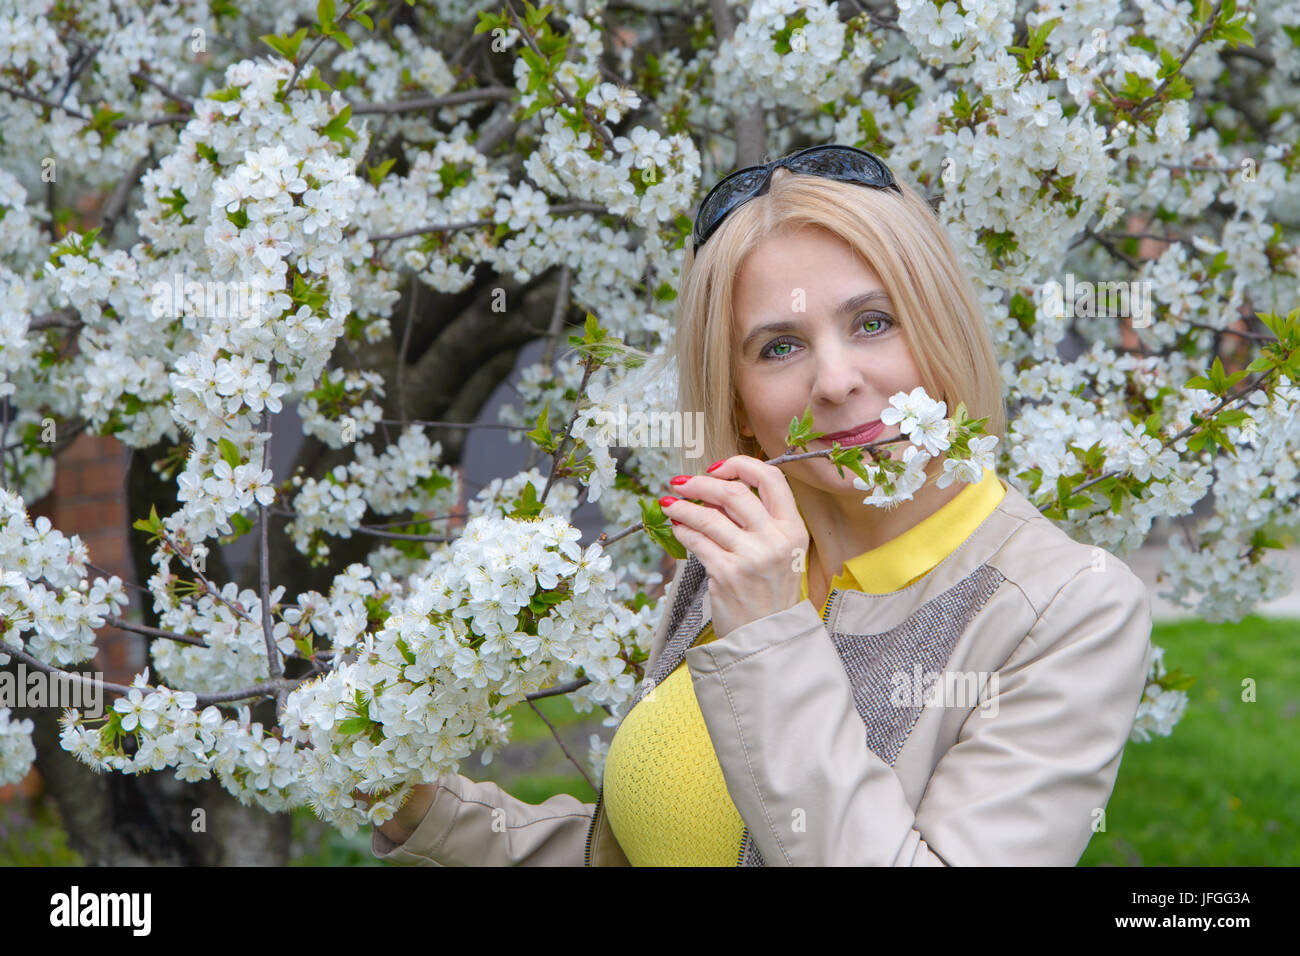 The blonde sniffs a flower Stock Photo